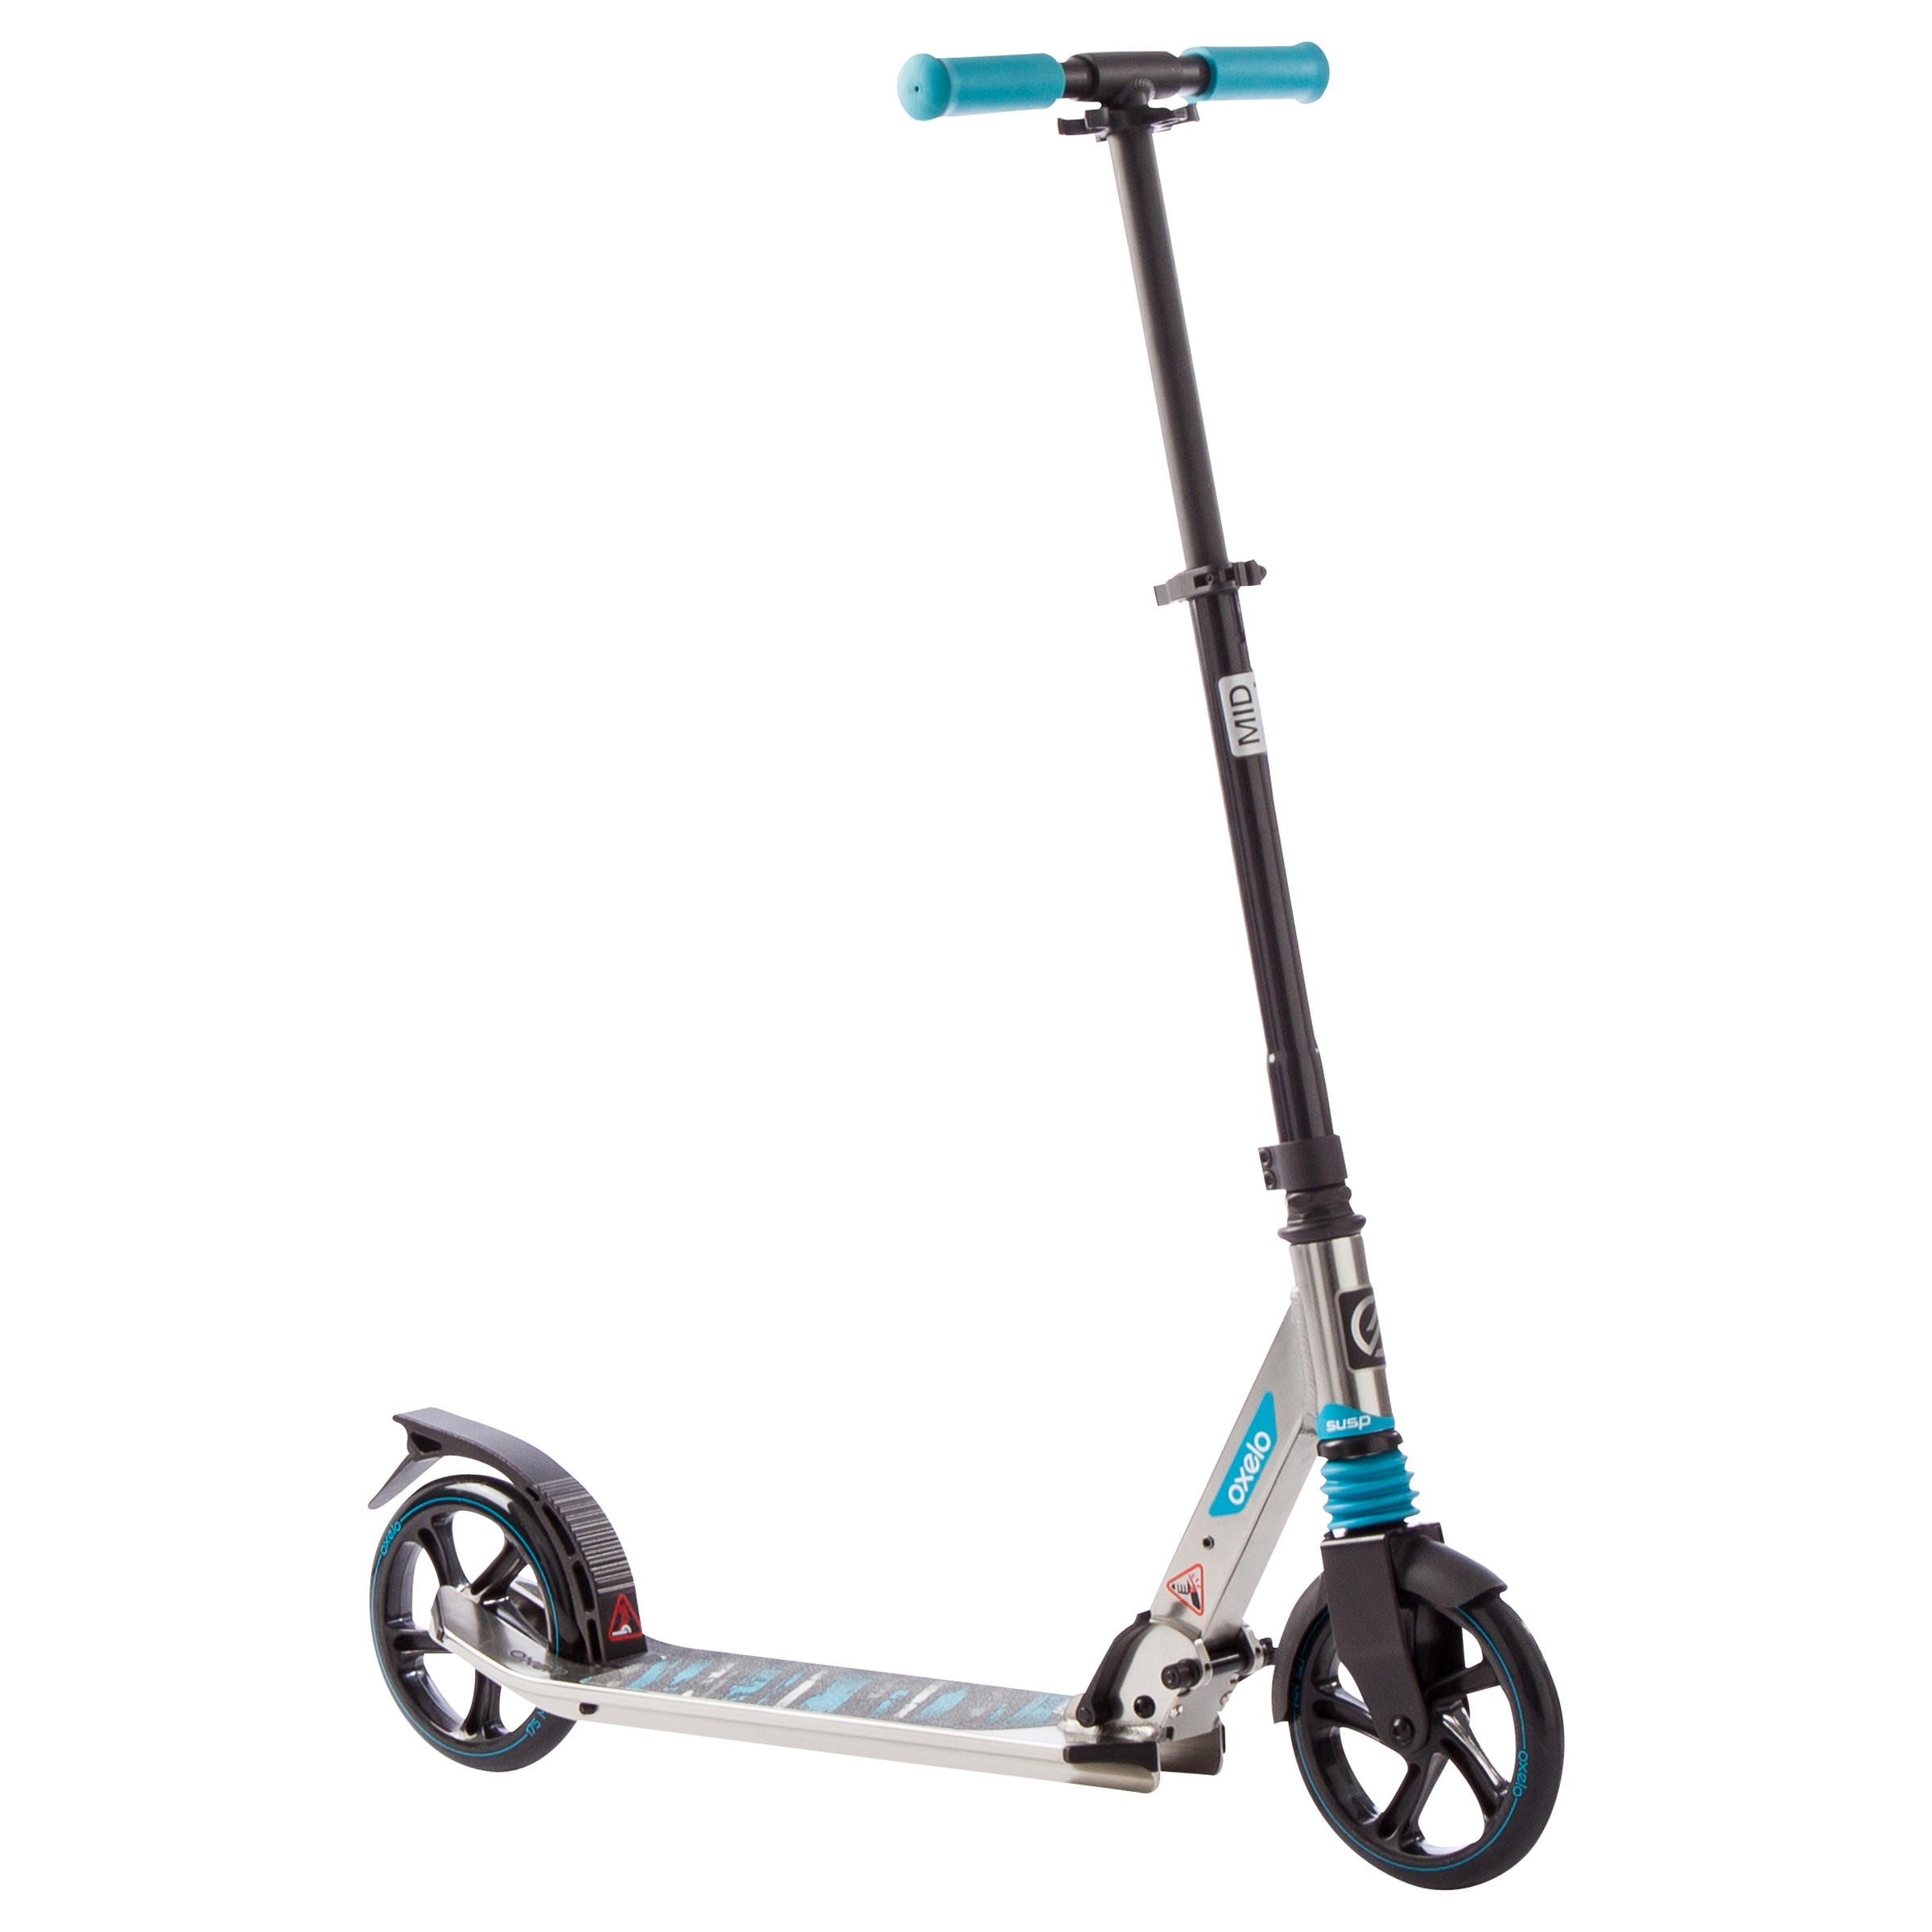 OXELO Mid 7 Suspension Scooter - Grey/Turquoise